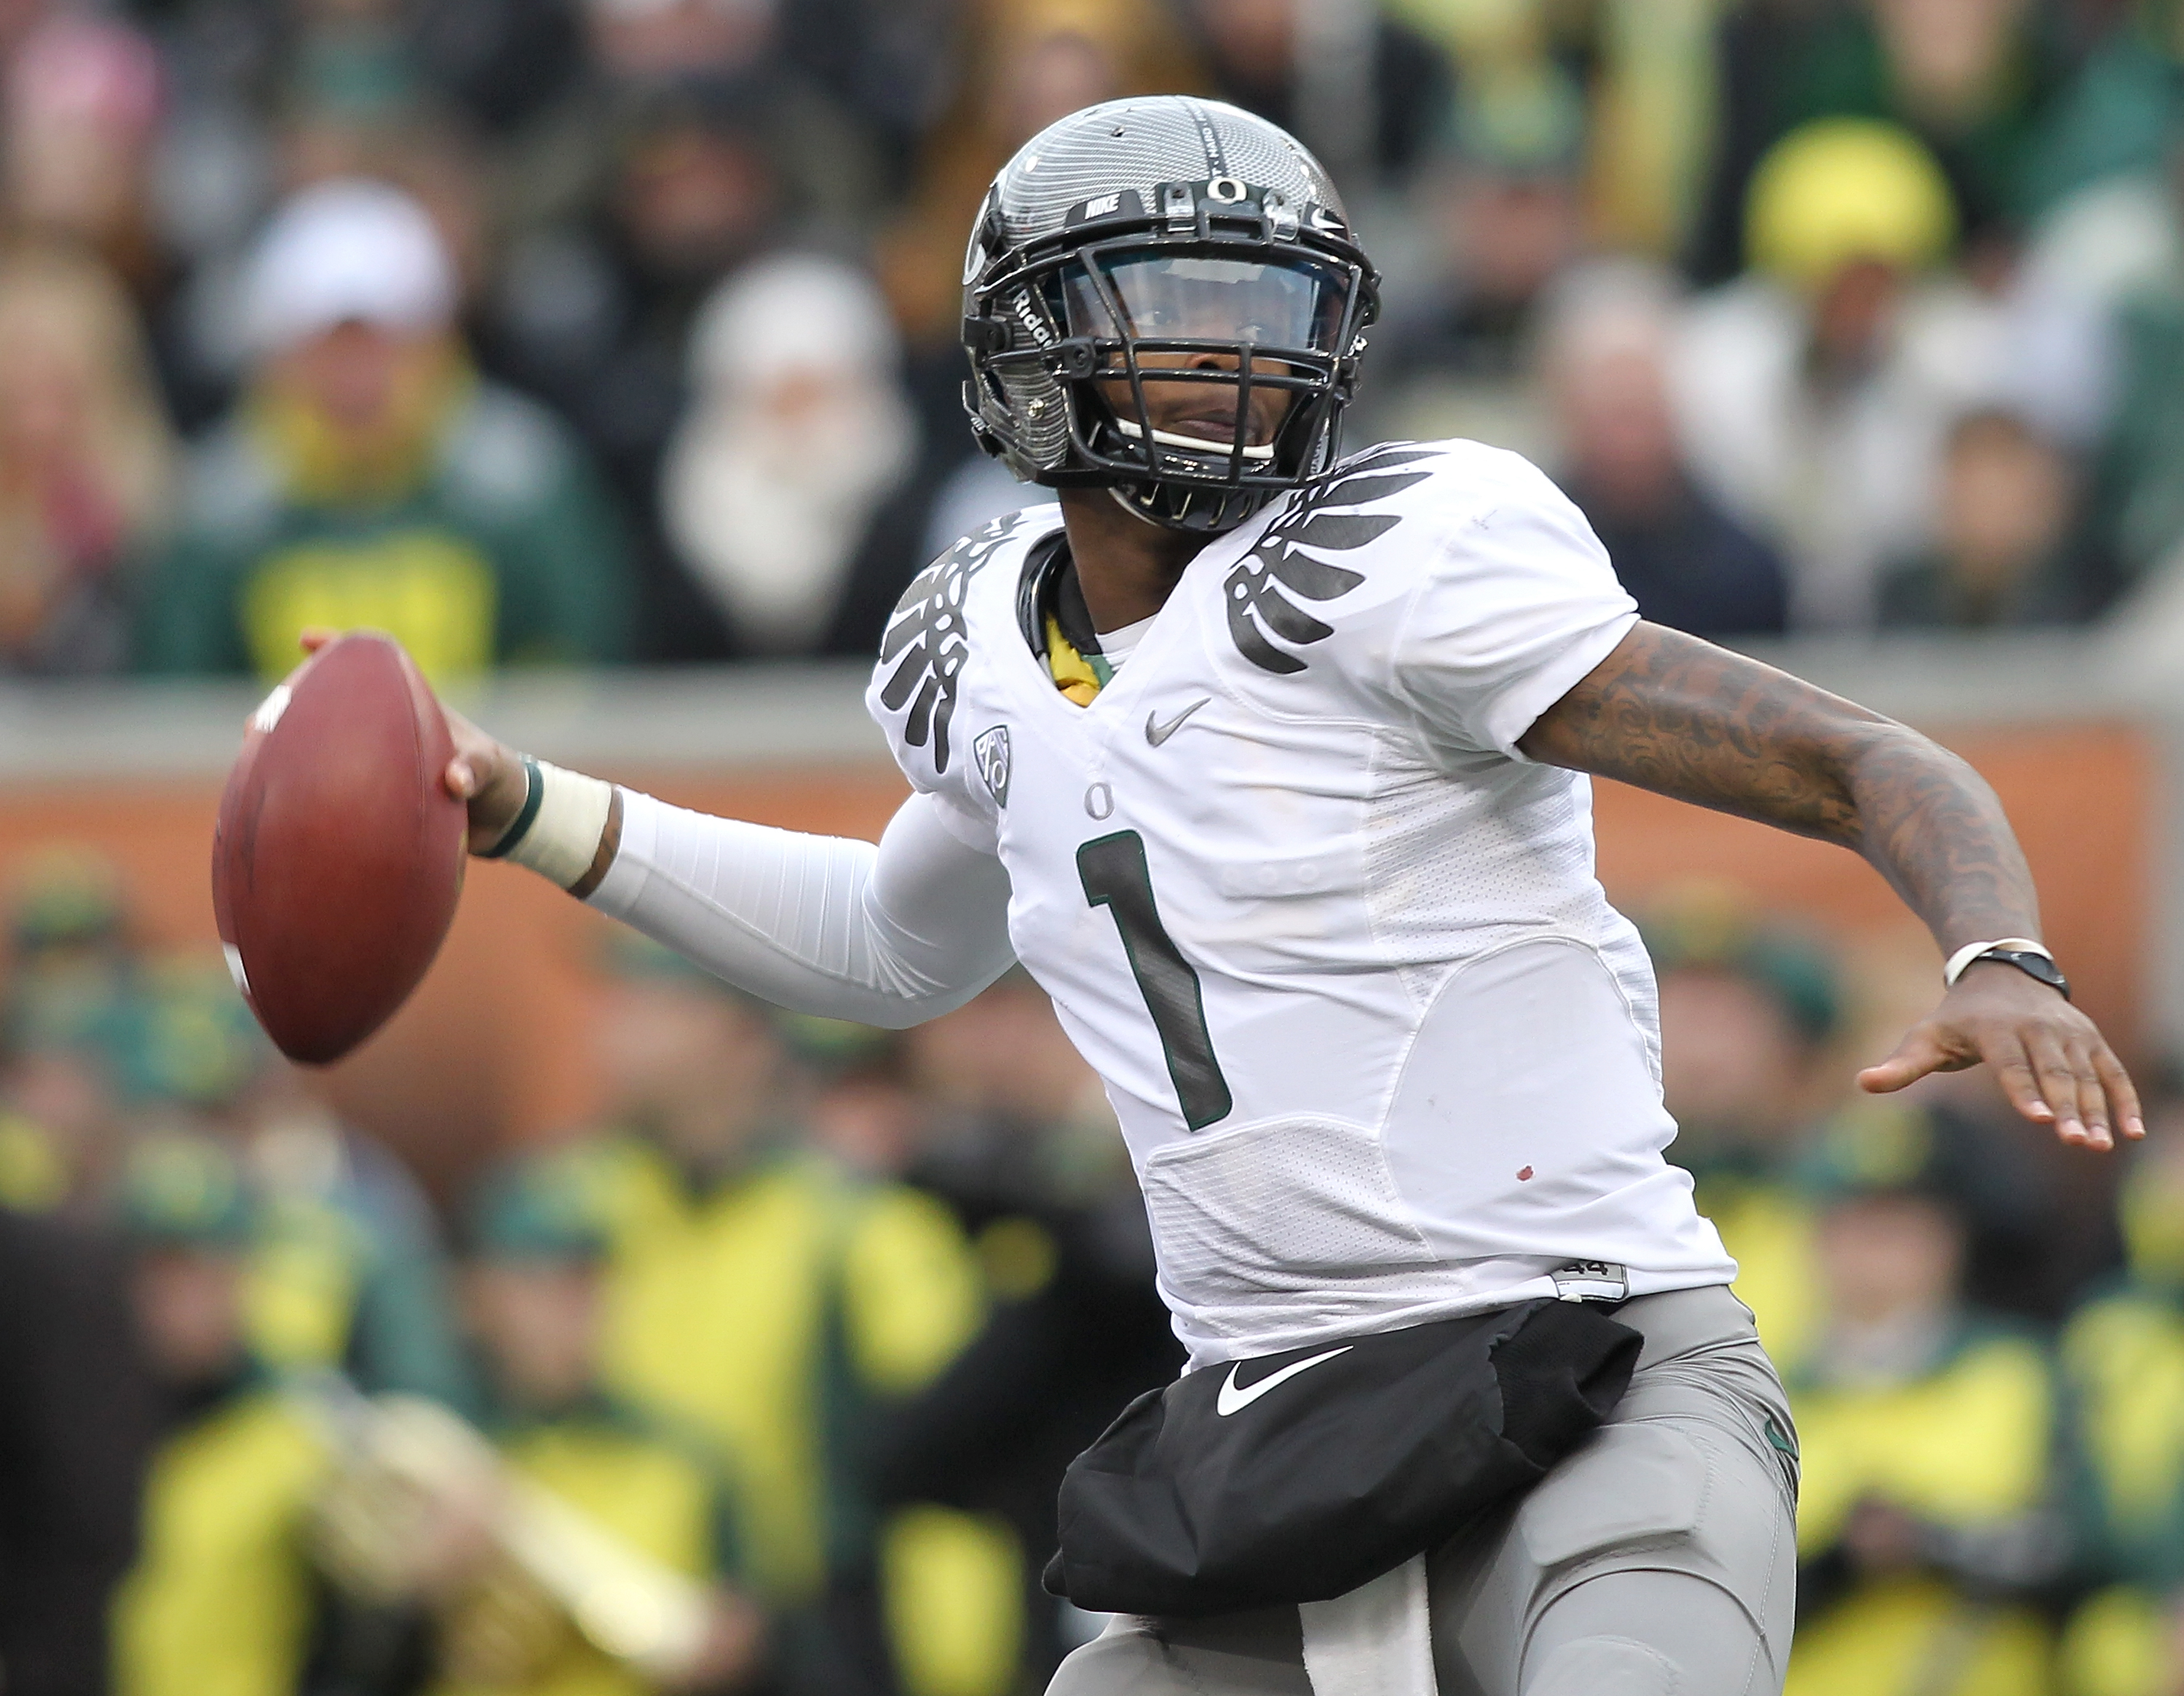 CORVALLIS, OR - DECEMBER 04:  Darron Thomas #1 of the Oregon Ducks throws a pass against the Oregon State Beavers during the 114th Civil War on December 4, 2010 at the Reser Stadium in Corvallis, Oregon.  (Photo by Jonathan Ferrey/Getty Images)